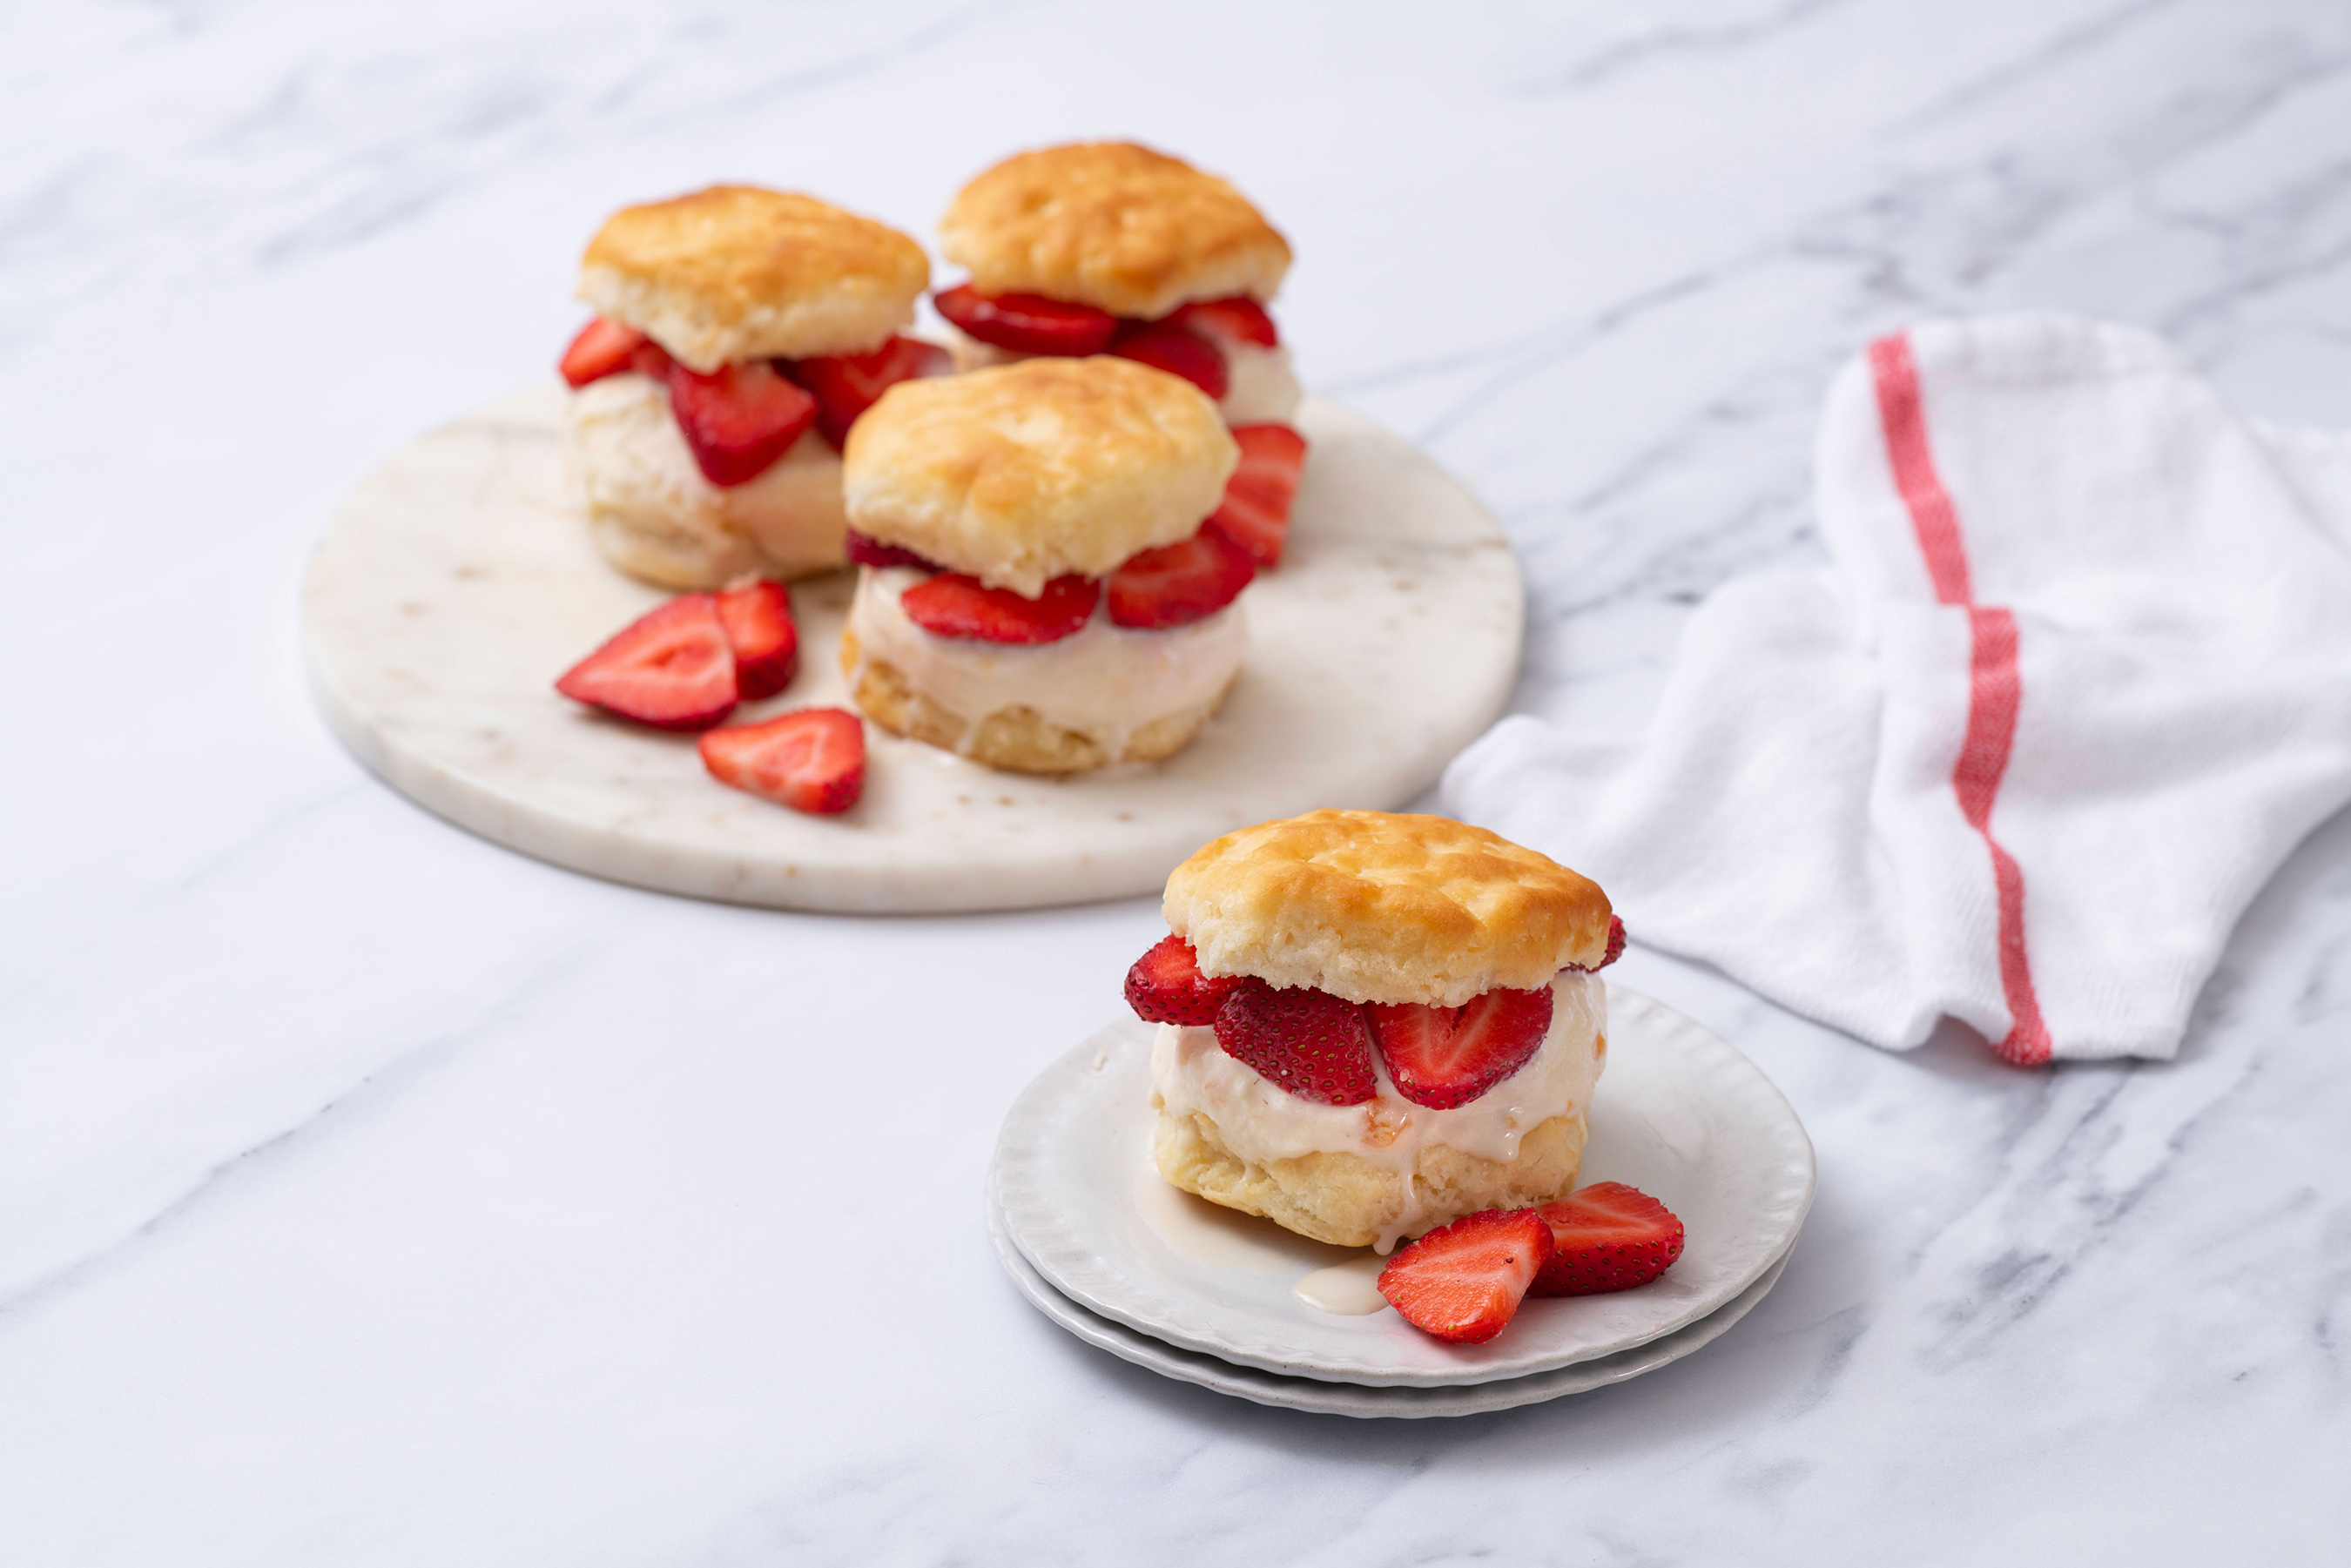 Strawberry Peach Shortcake Ice Cream Sandwich recipe using Chick-fil-A Biscuits and a Chick-fil-A Strawberry Milkshake from Chick-fil-A Shared Table nonprofit partner FeedNC in Mooresville, N.C.